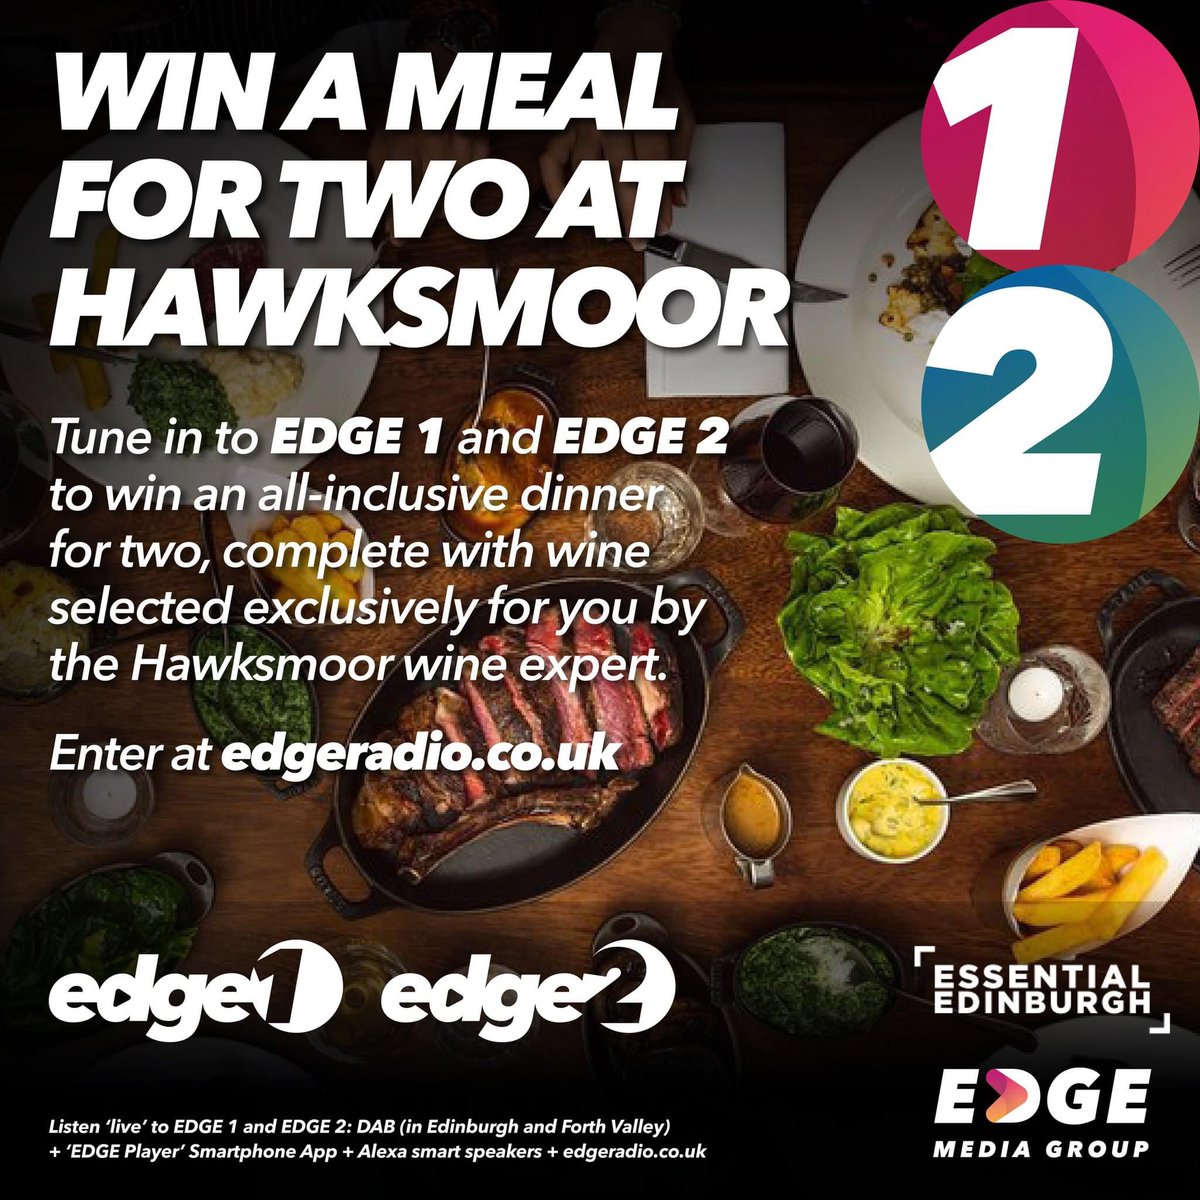 We’ve teamed up with Essential Edinburgh and their Eat Out campaign to attract locals back to the capital’s restaurants, bars and hotels and we have a meal for two up for grabs each week throughout the month. edgradio.co.uk